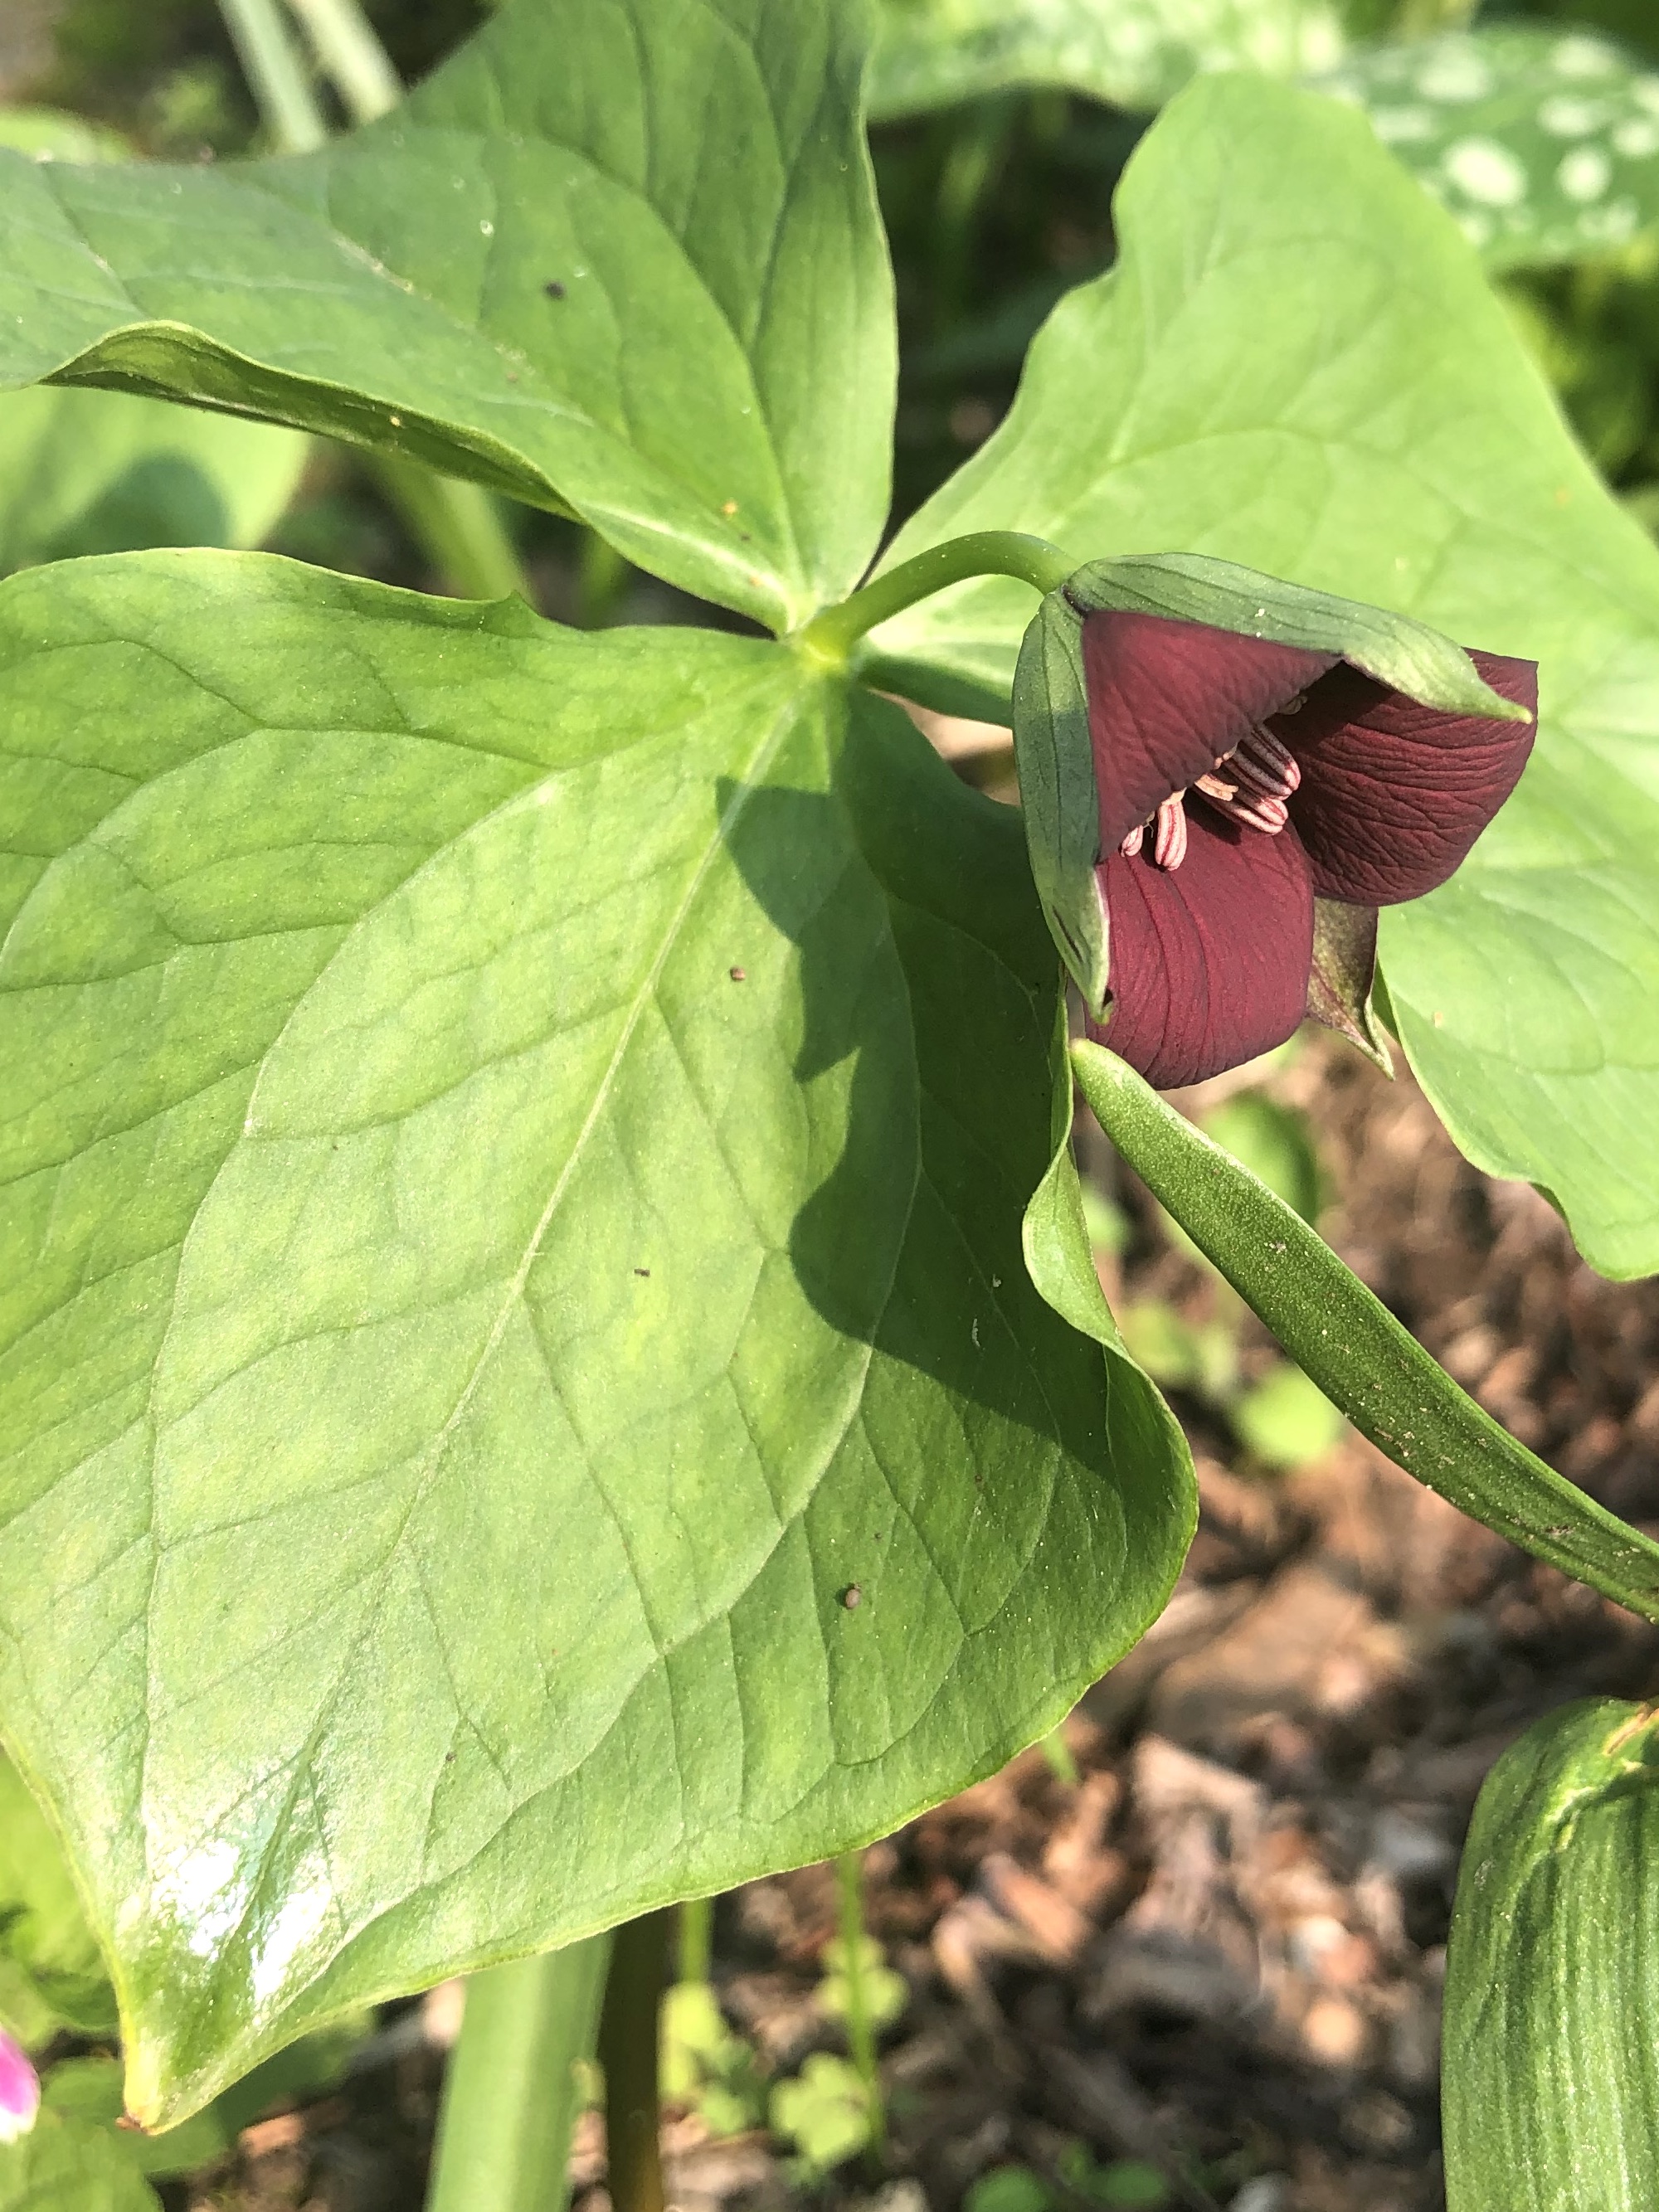 Red Trillium in Nakoma garden in Madison, Wisconsin on May 12, 2022.